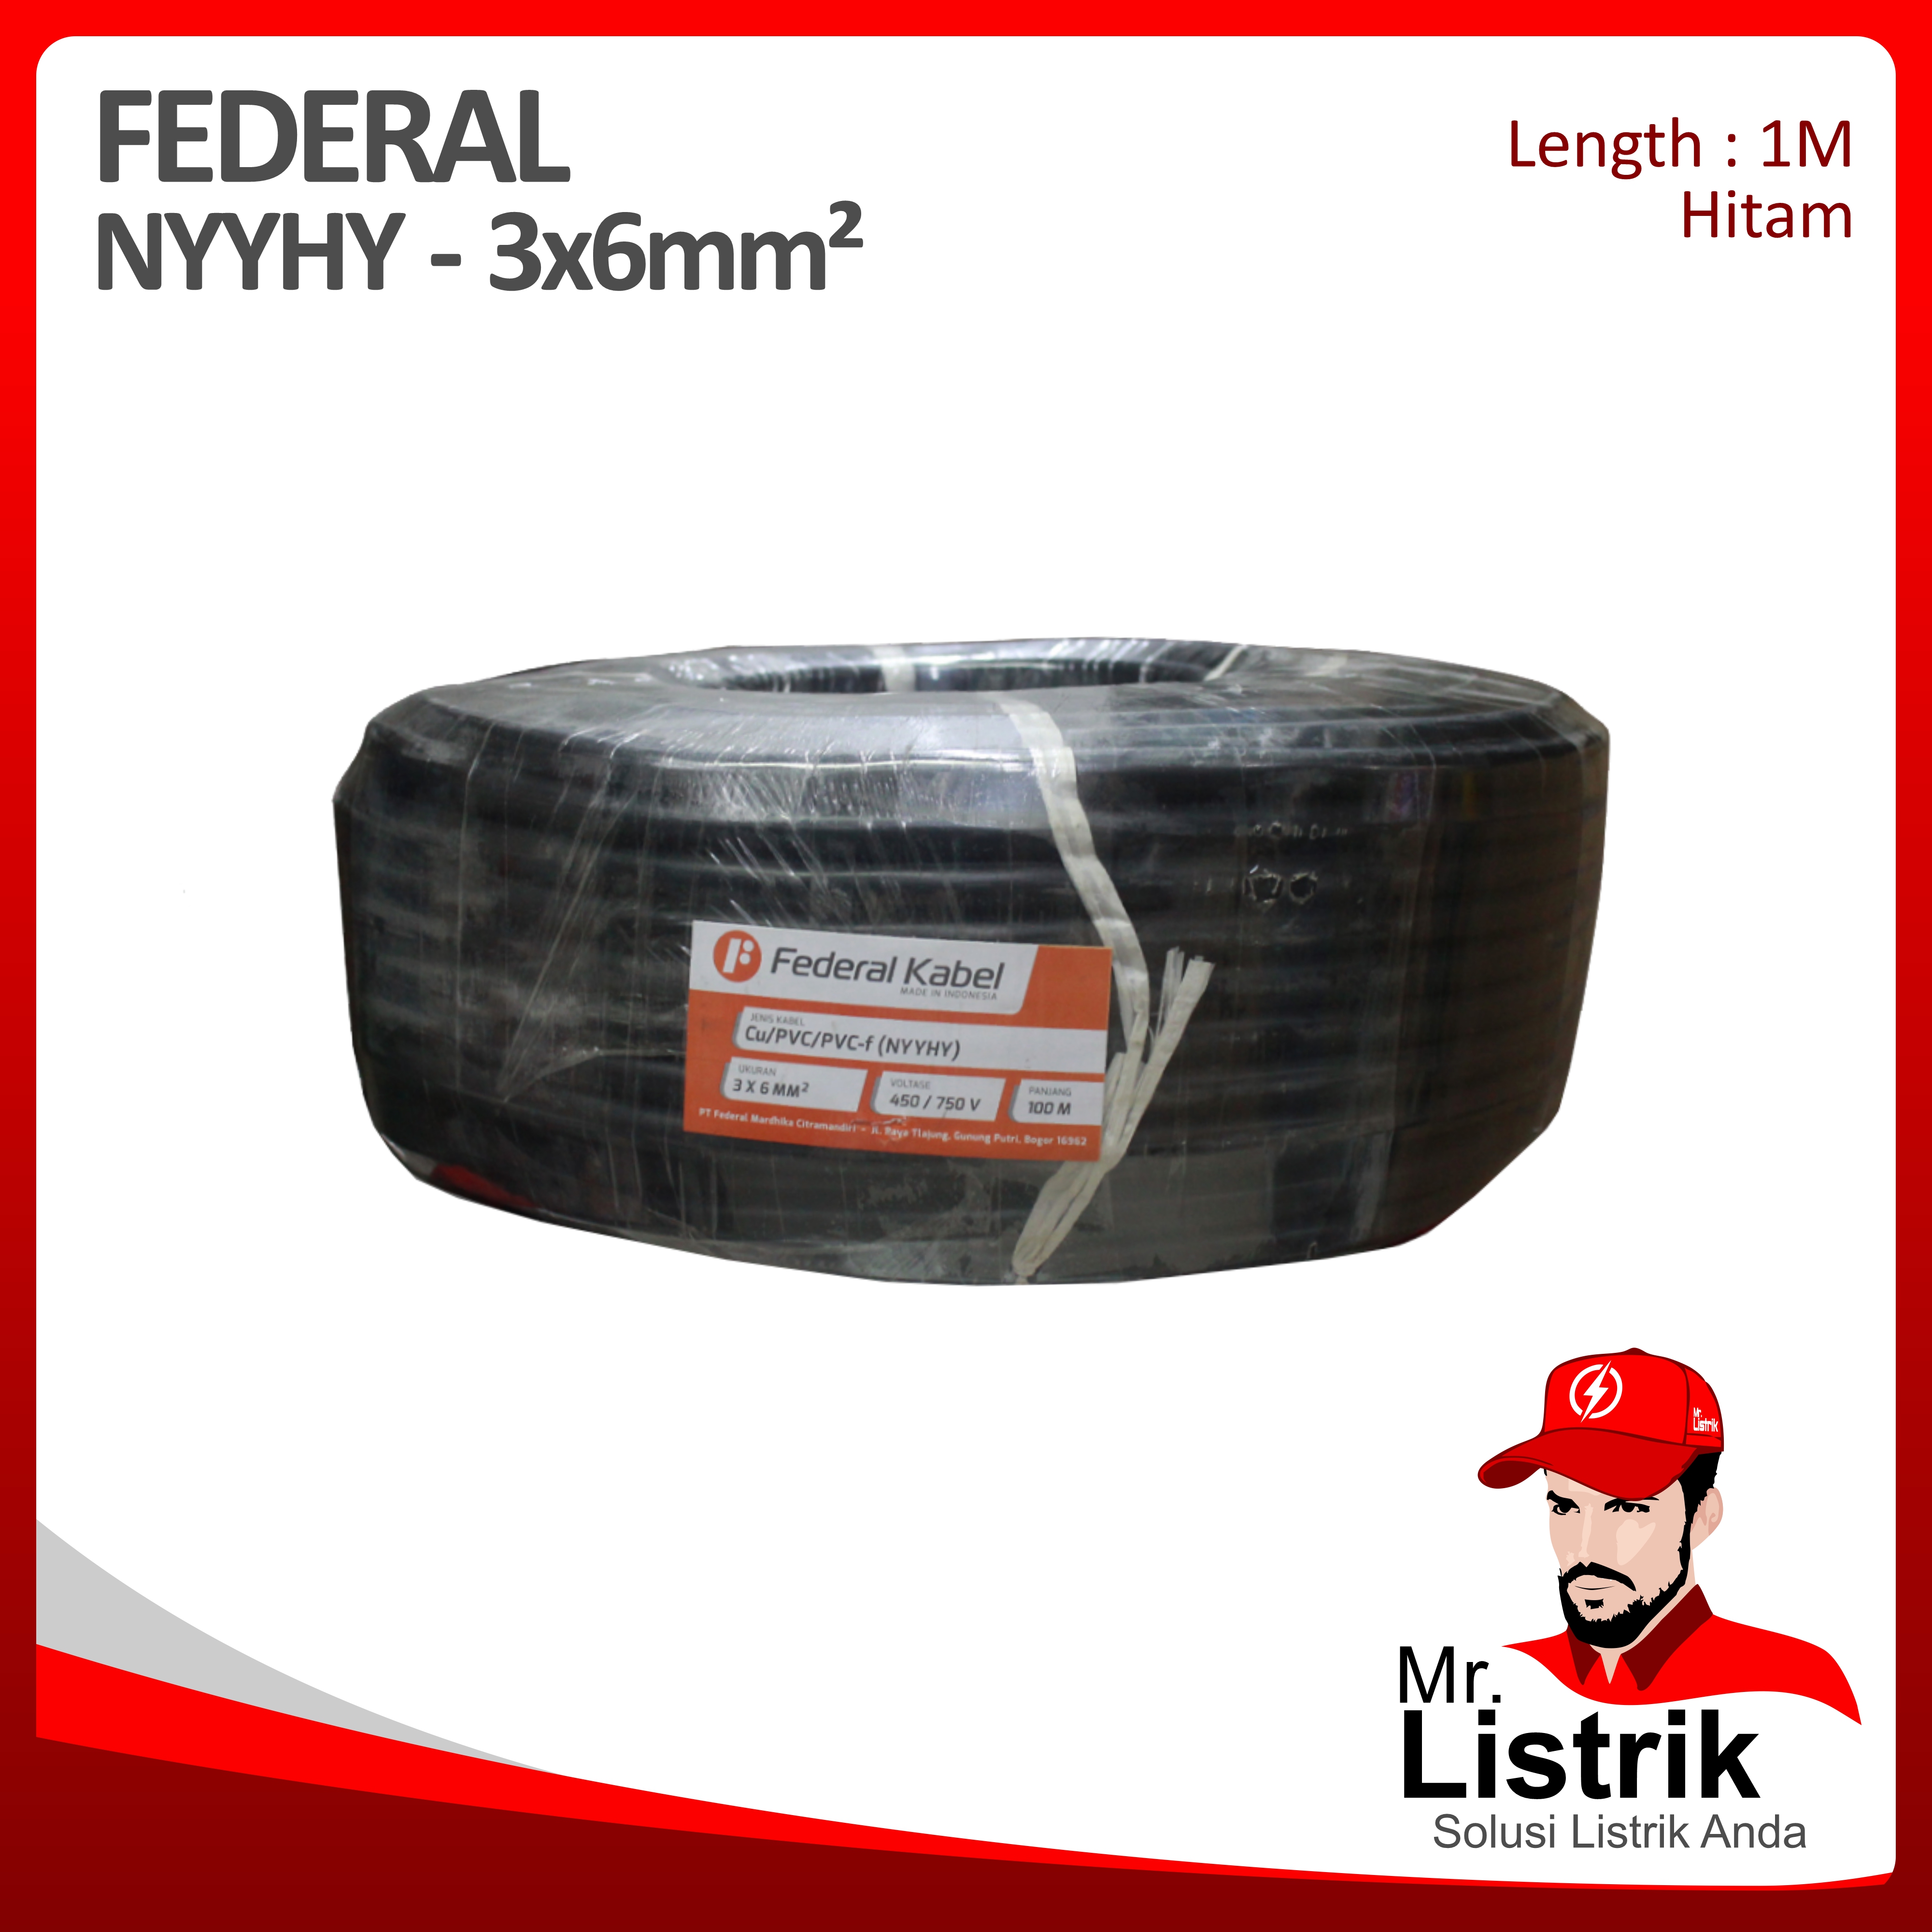 Kabel NYYHY Federal 3x6 mm² @1 Mtr